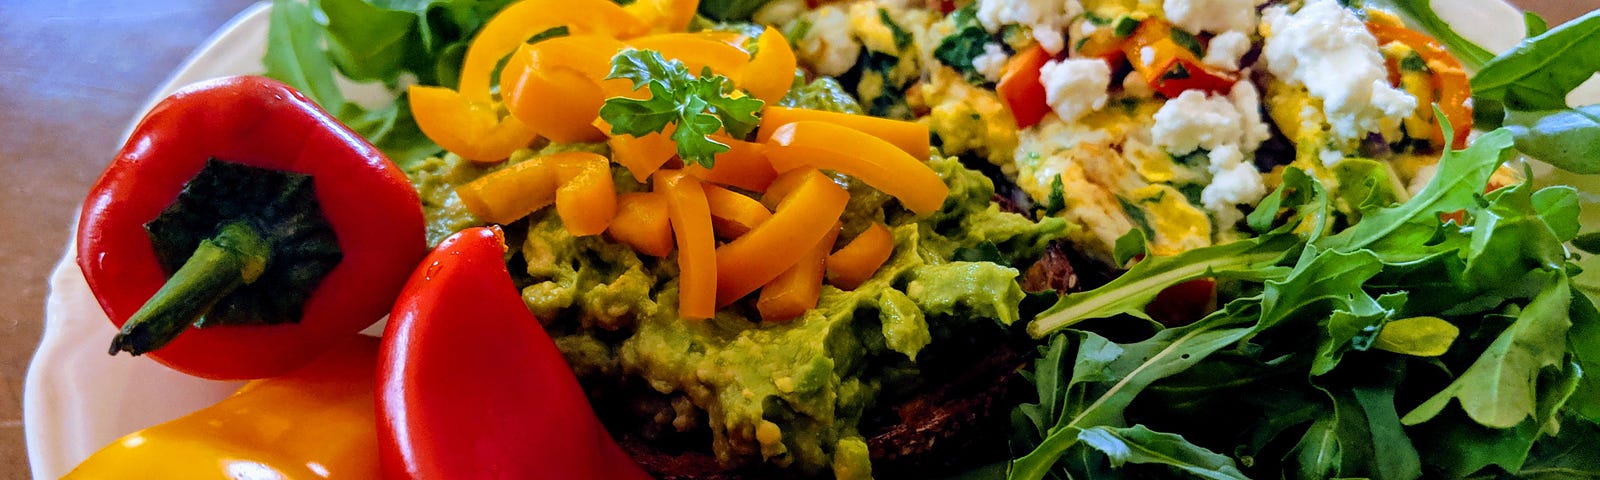 White plate of brunch food including scrambled eggs, avocado toast, fresh arugula and mini sweet peppers .